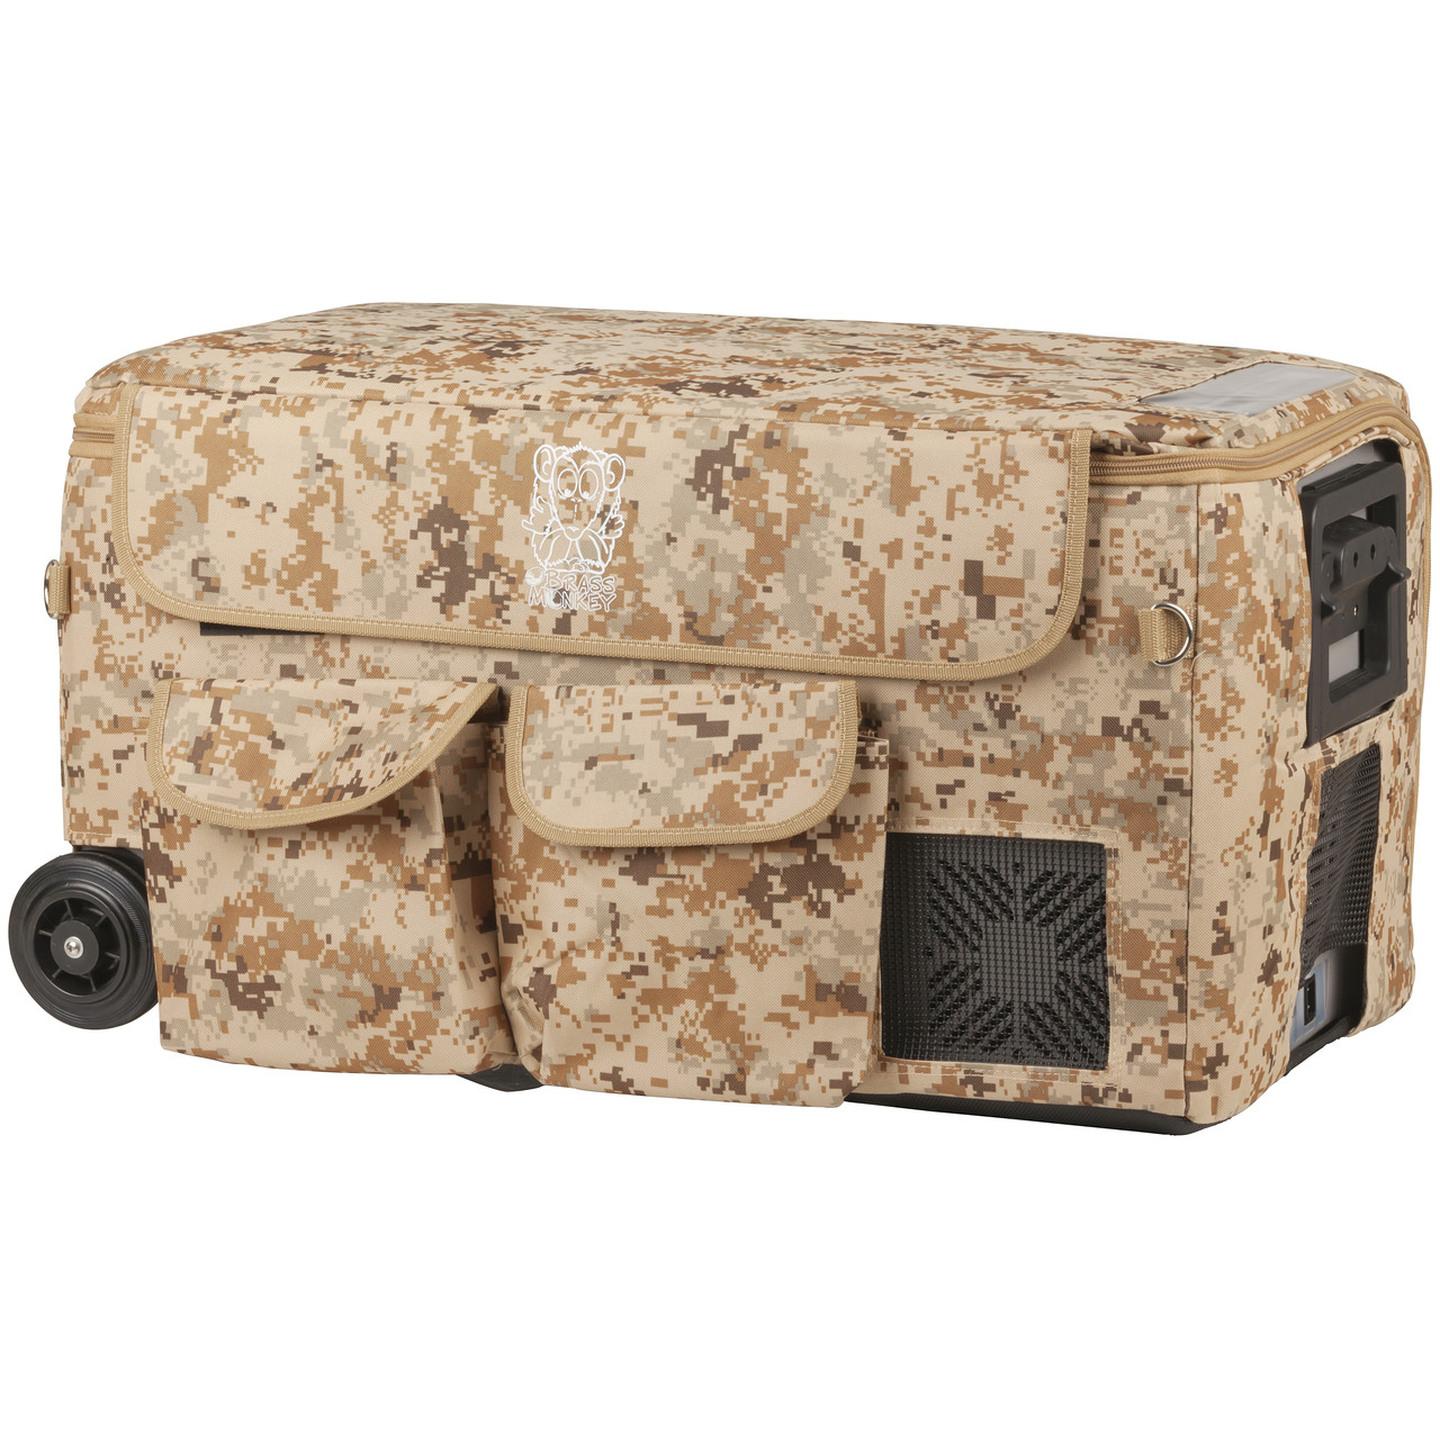 Camouflage Print Insulated Cover for 60L Brass Monkey Portable Fridge/Freezer